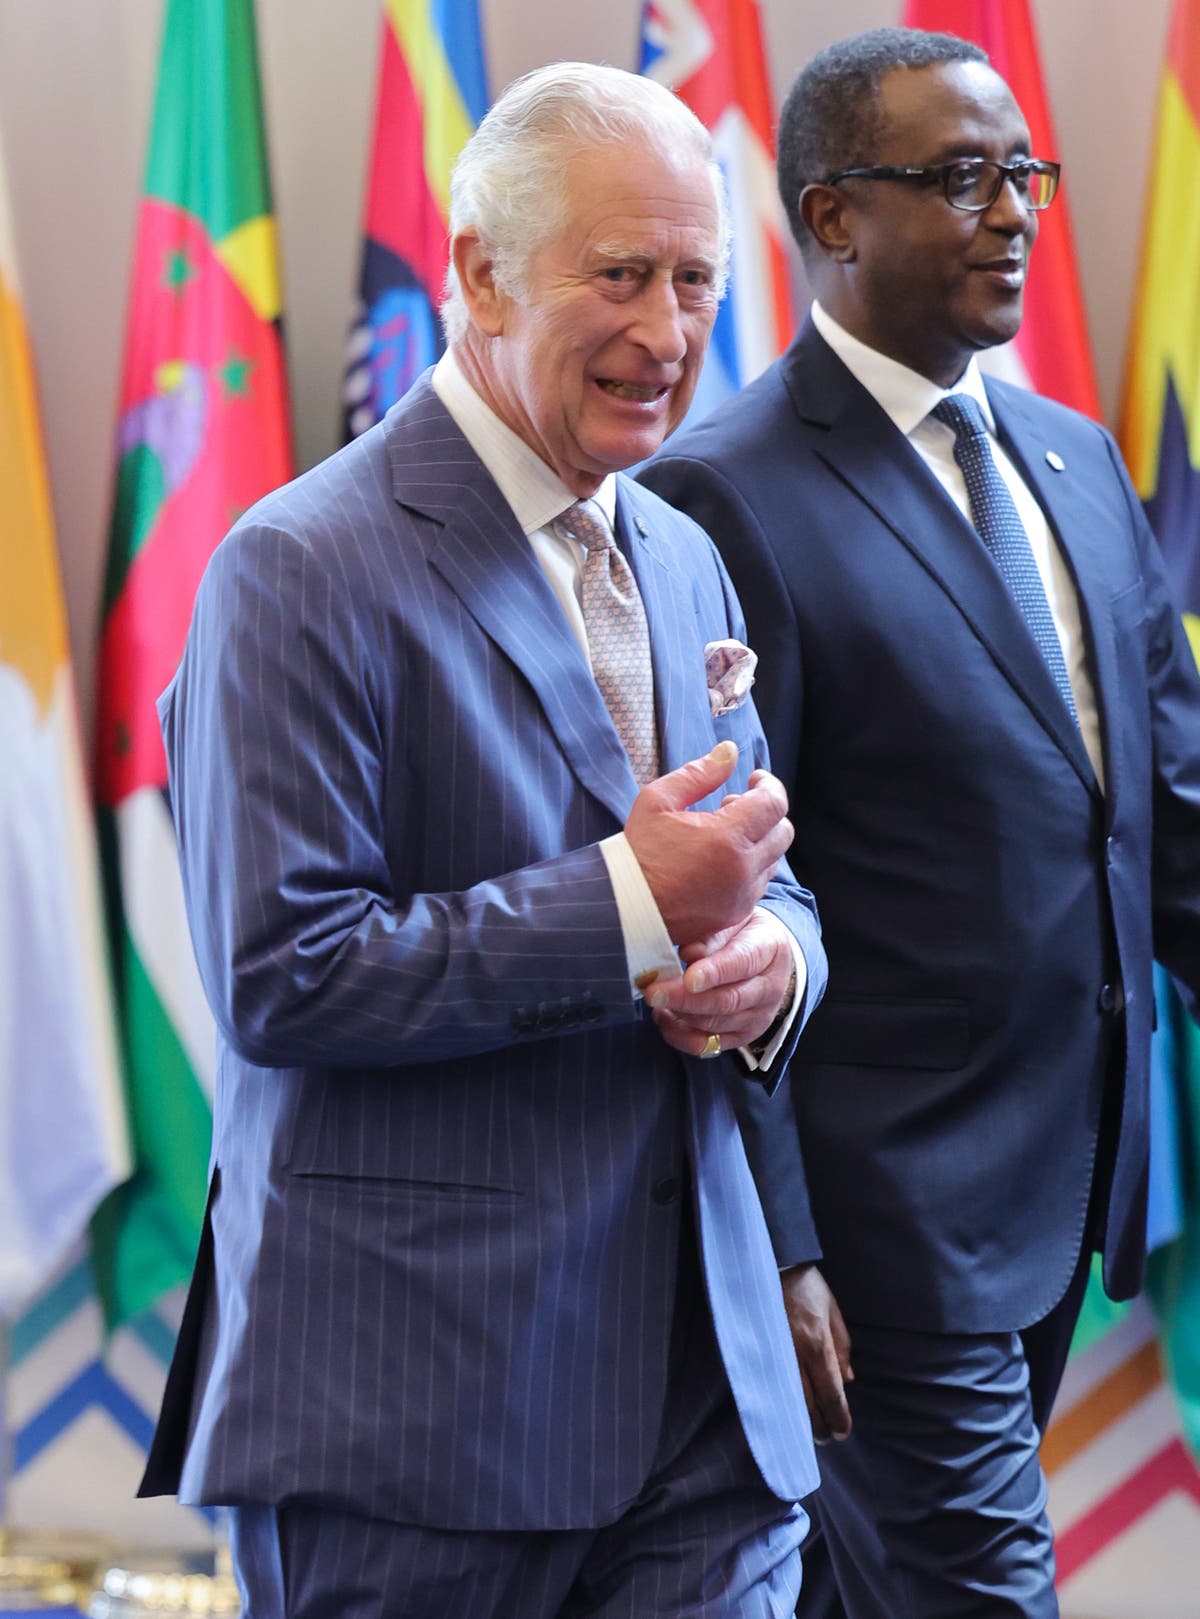 Prince Charles shares ‘sorrow’ at suffering slavery caused – but no apology